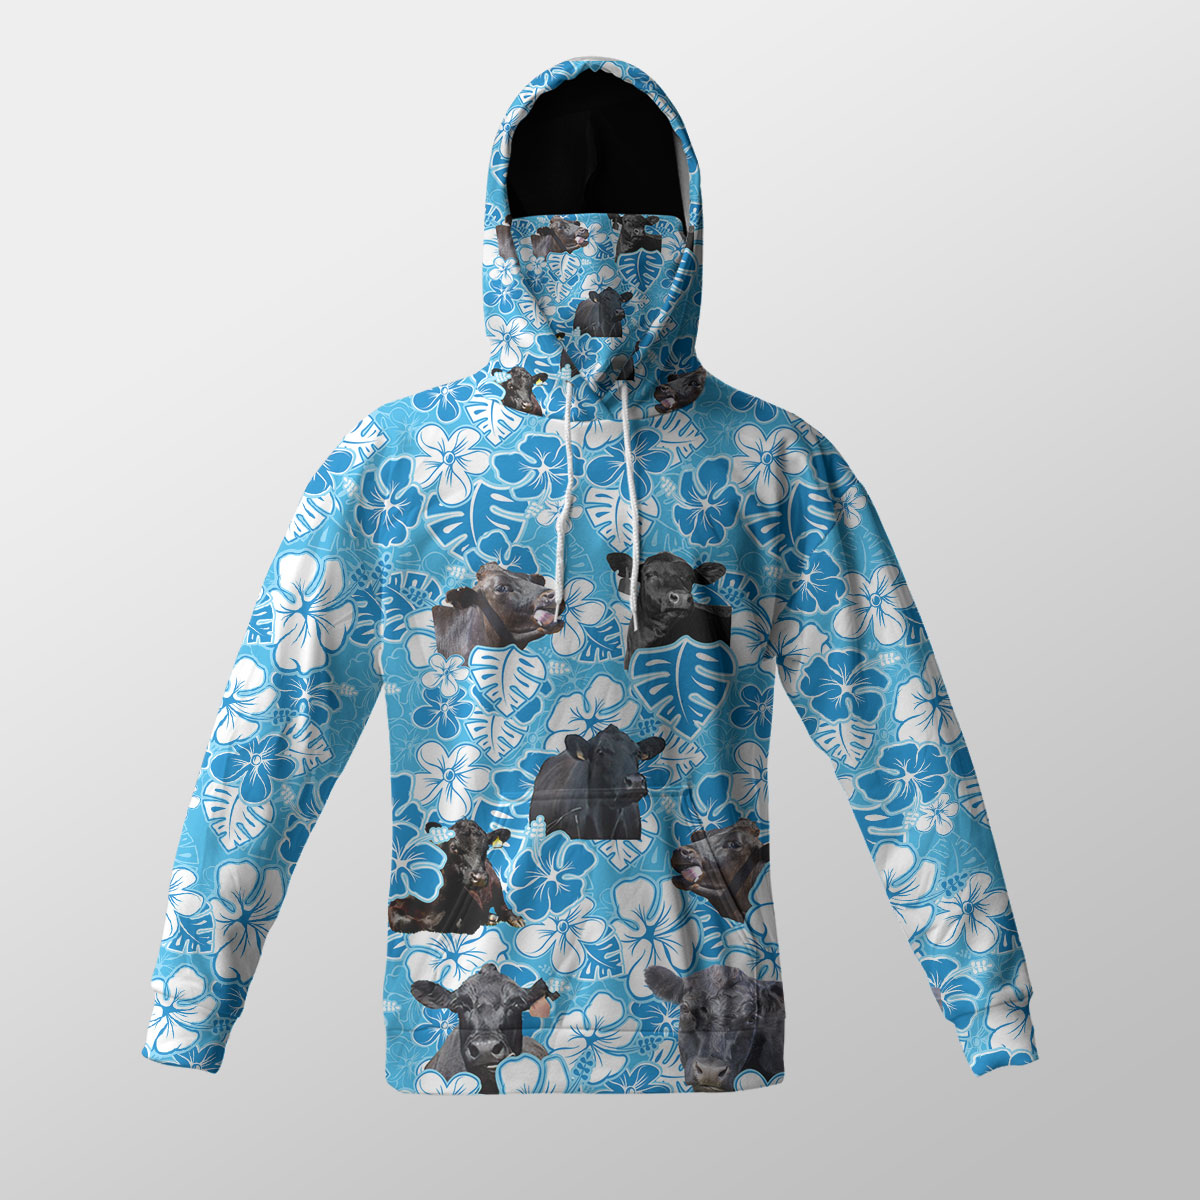 Ha NoiBlack Angus Dirt And Cow Testing 111 3D Mask Hoodie